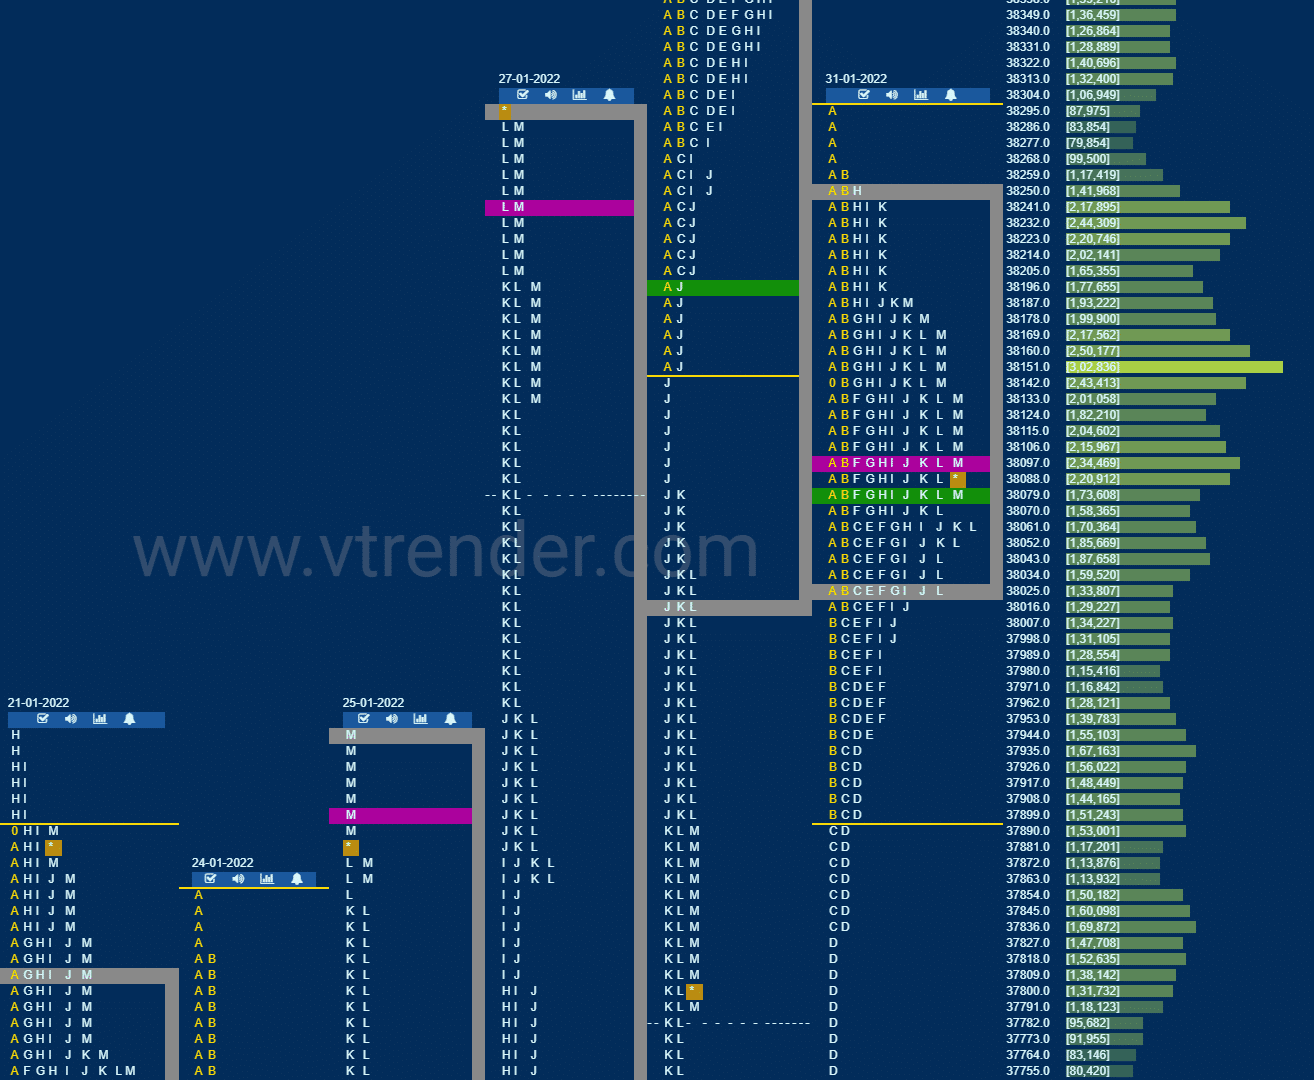 Bnf 20 Market Profile Analysis Dated 31St January 2022 Banknifty Futures, Charts, Day Trading, Intraday Trading, Intraday Trading Strategies, Market Profile, Market Profile Trading Strategies, Nifty Futures, Order Flow Analysis, Support And Resistance, Technical Analysis, Trading Strategies, Volume Profile Trading